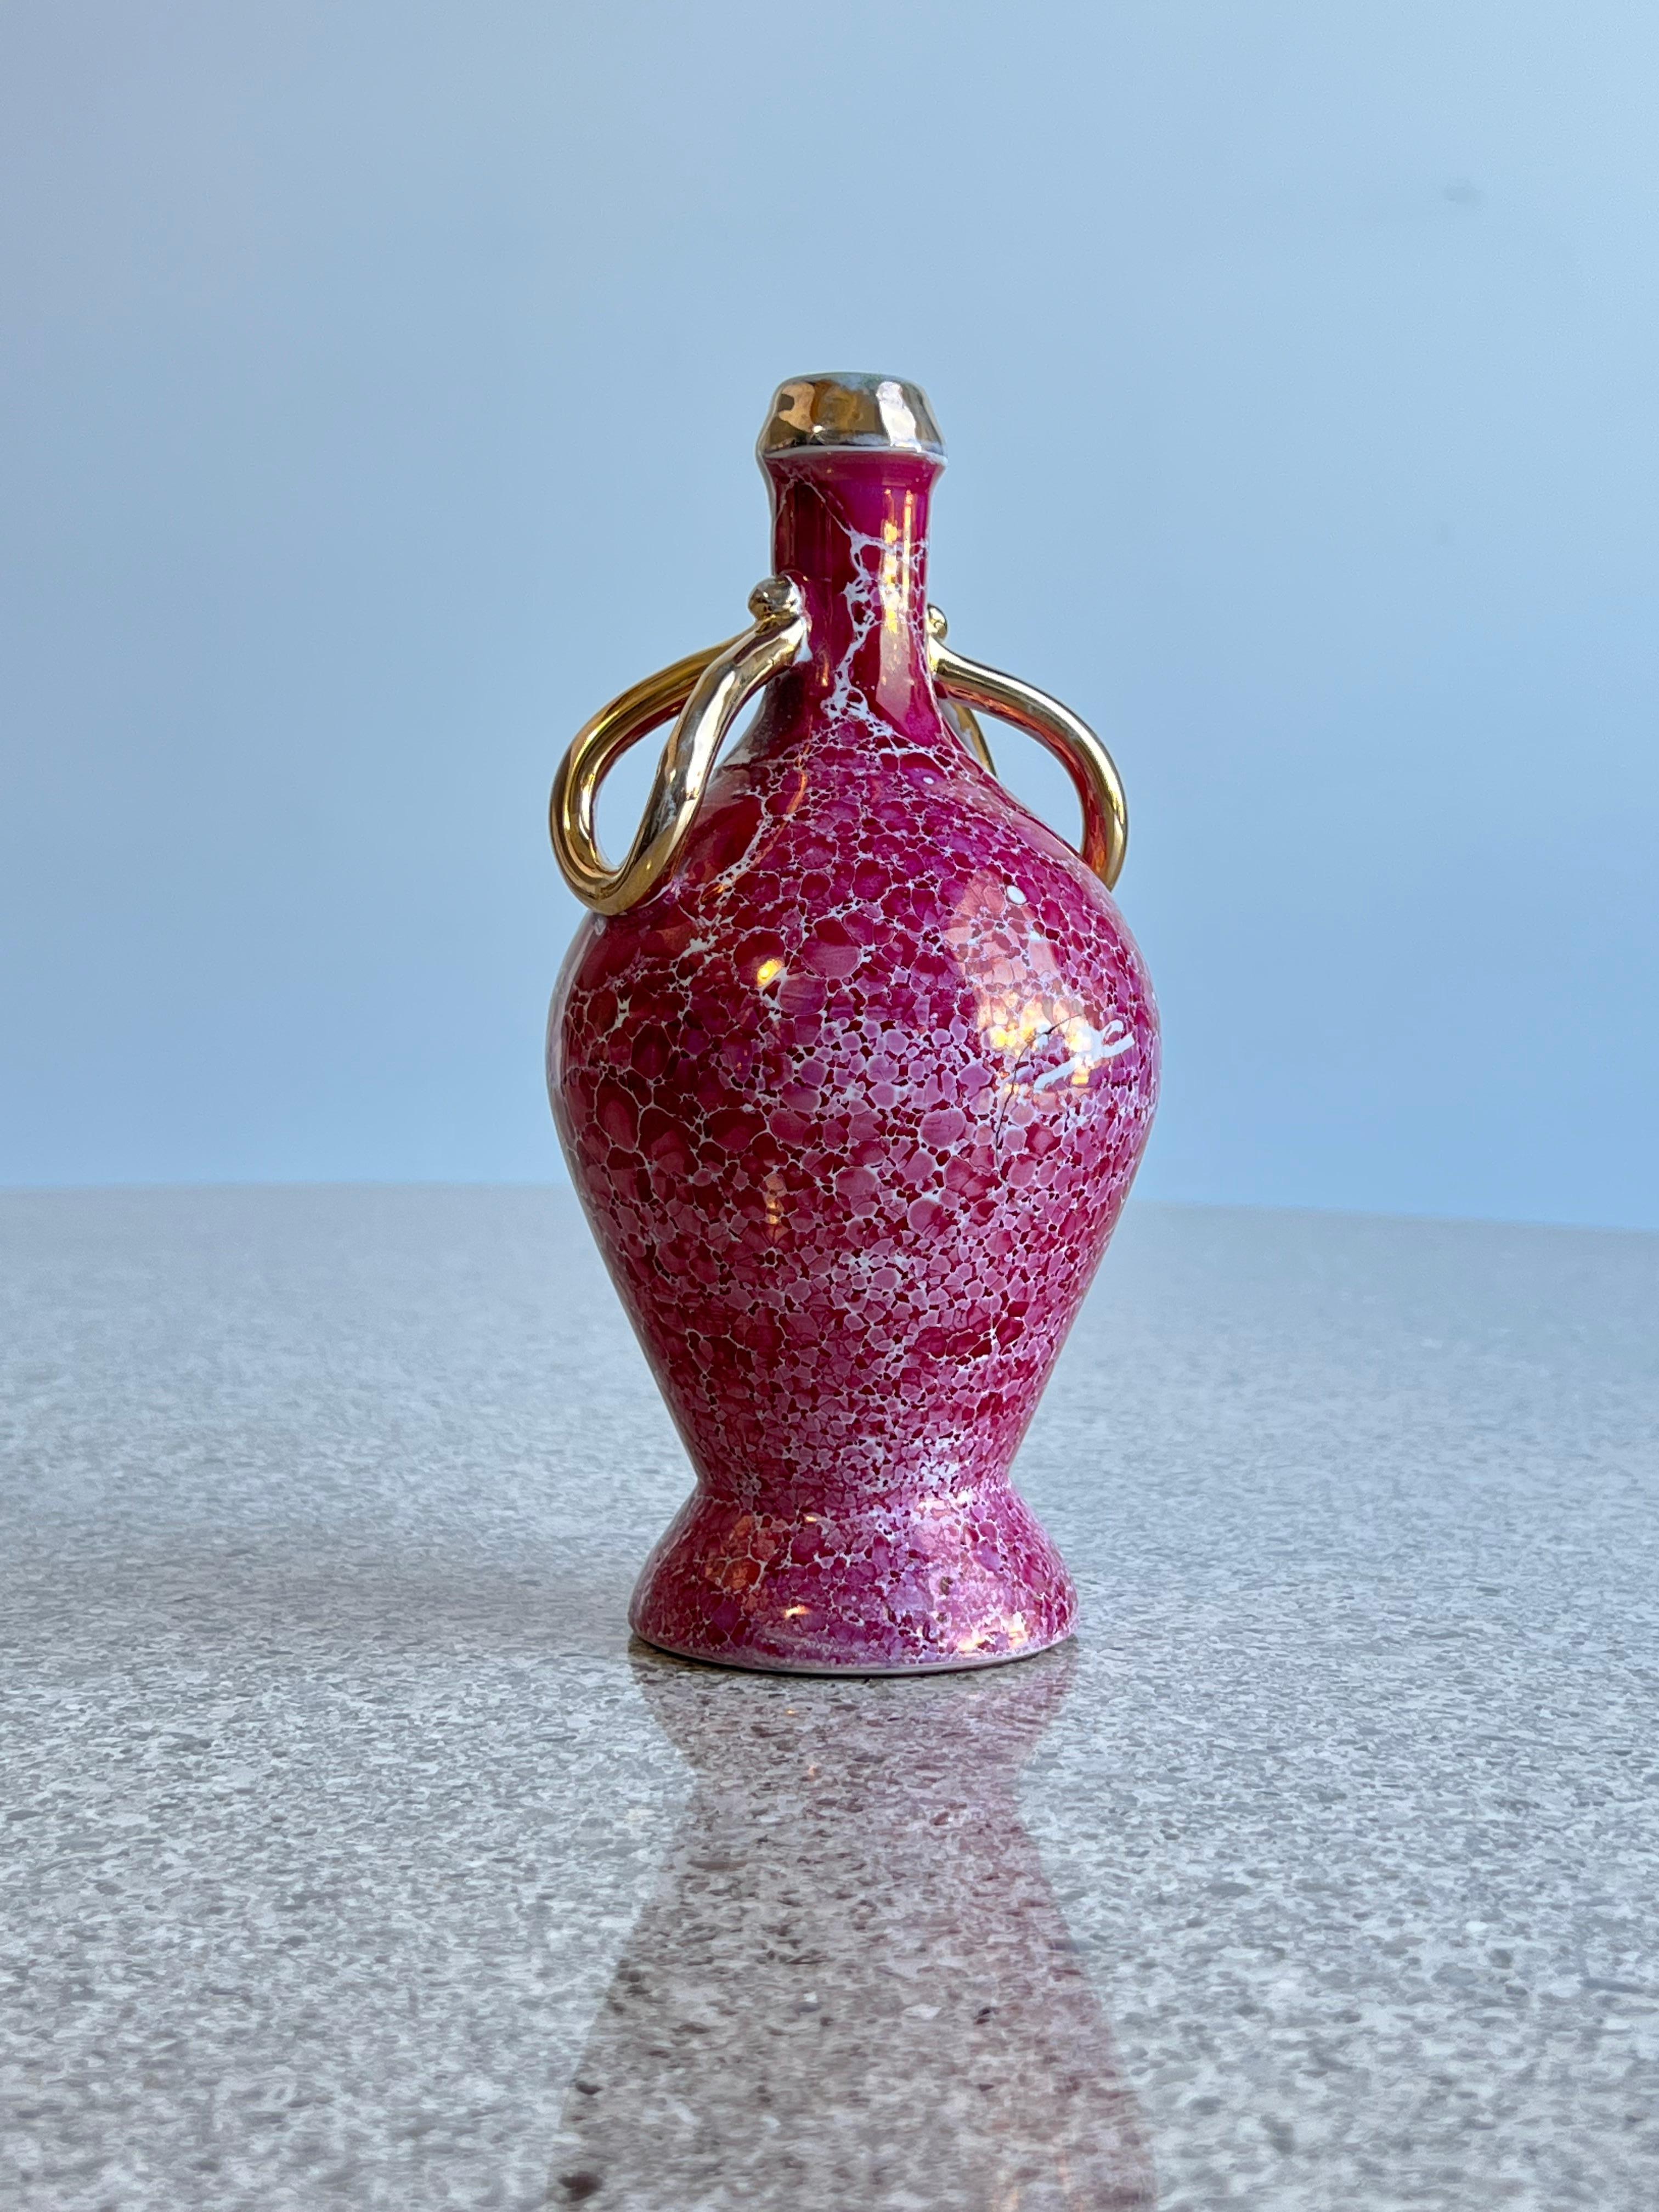 Italian Limoges Porcelain Burgundy and gold 1970s.
Incredible 20cm high vase with gold hand paint art work, probably made to serve olive oil or vinegar on the tables 1950s Italian dinner tables. 
  